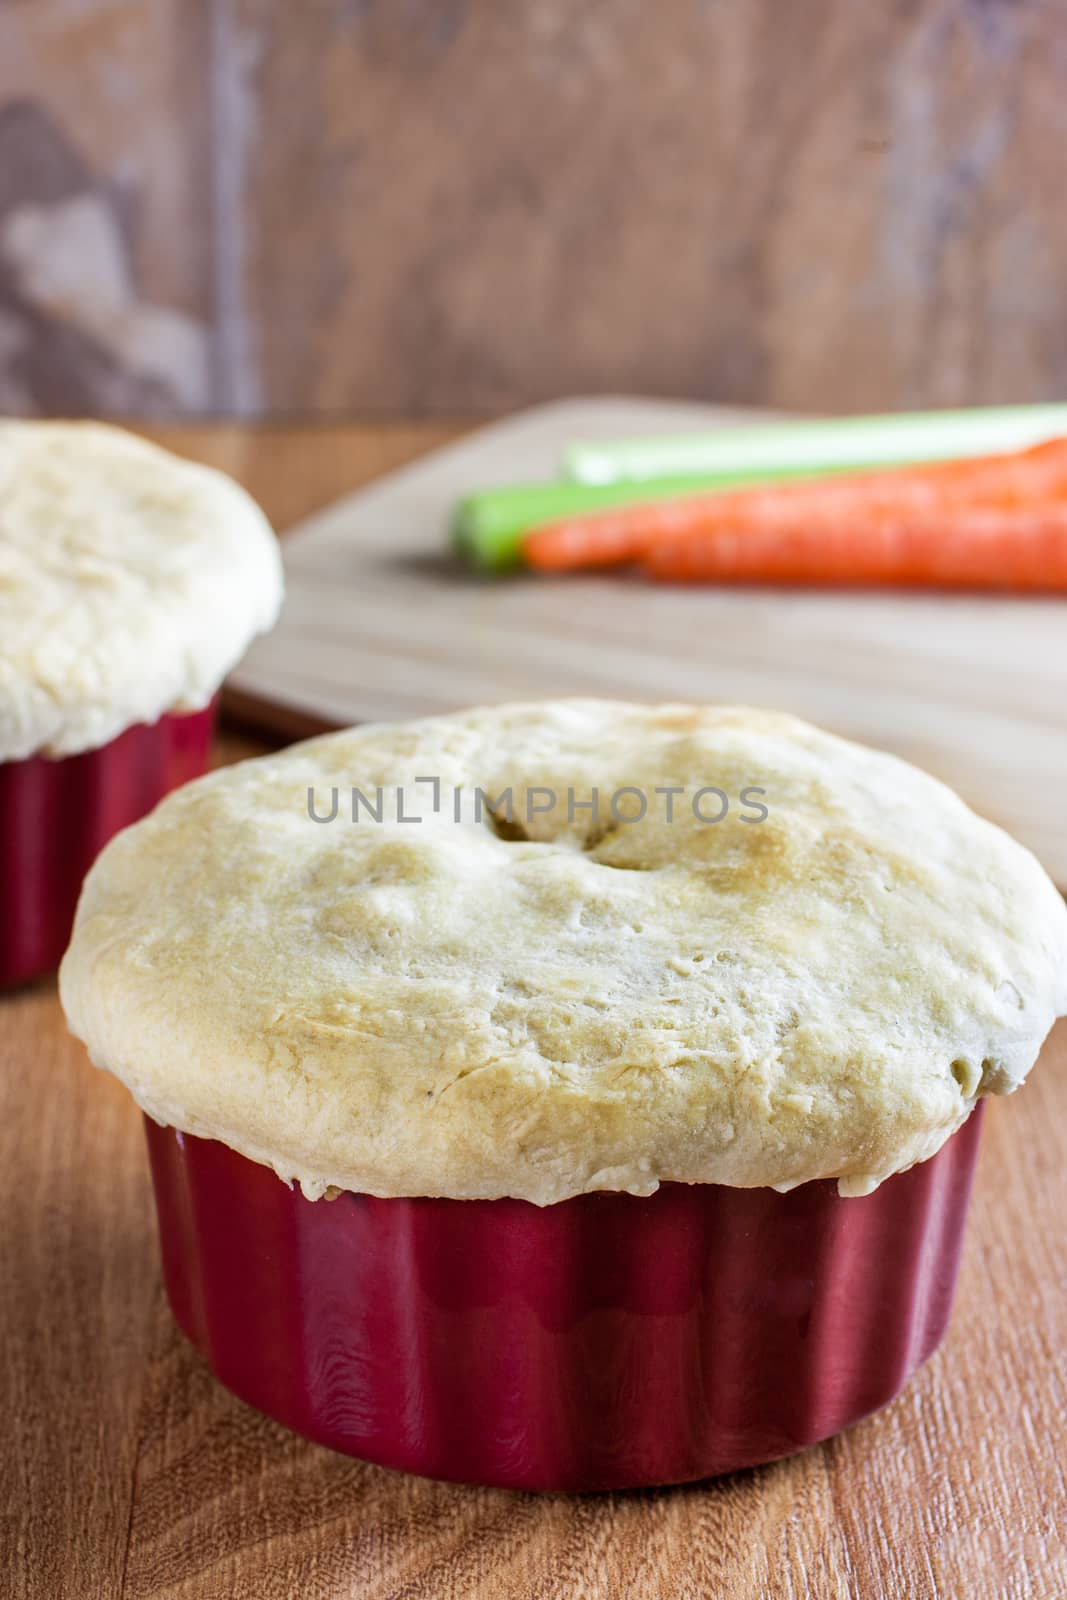 Chicken pot pie in a red ramakin cools on a wooden counter top in the afternoon sun.